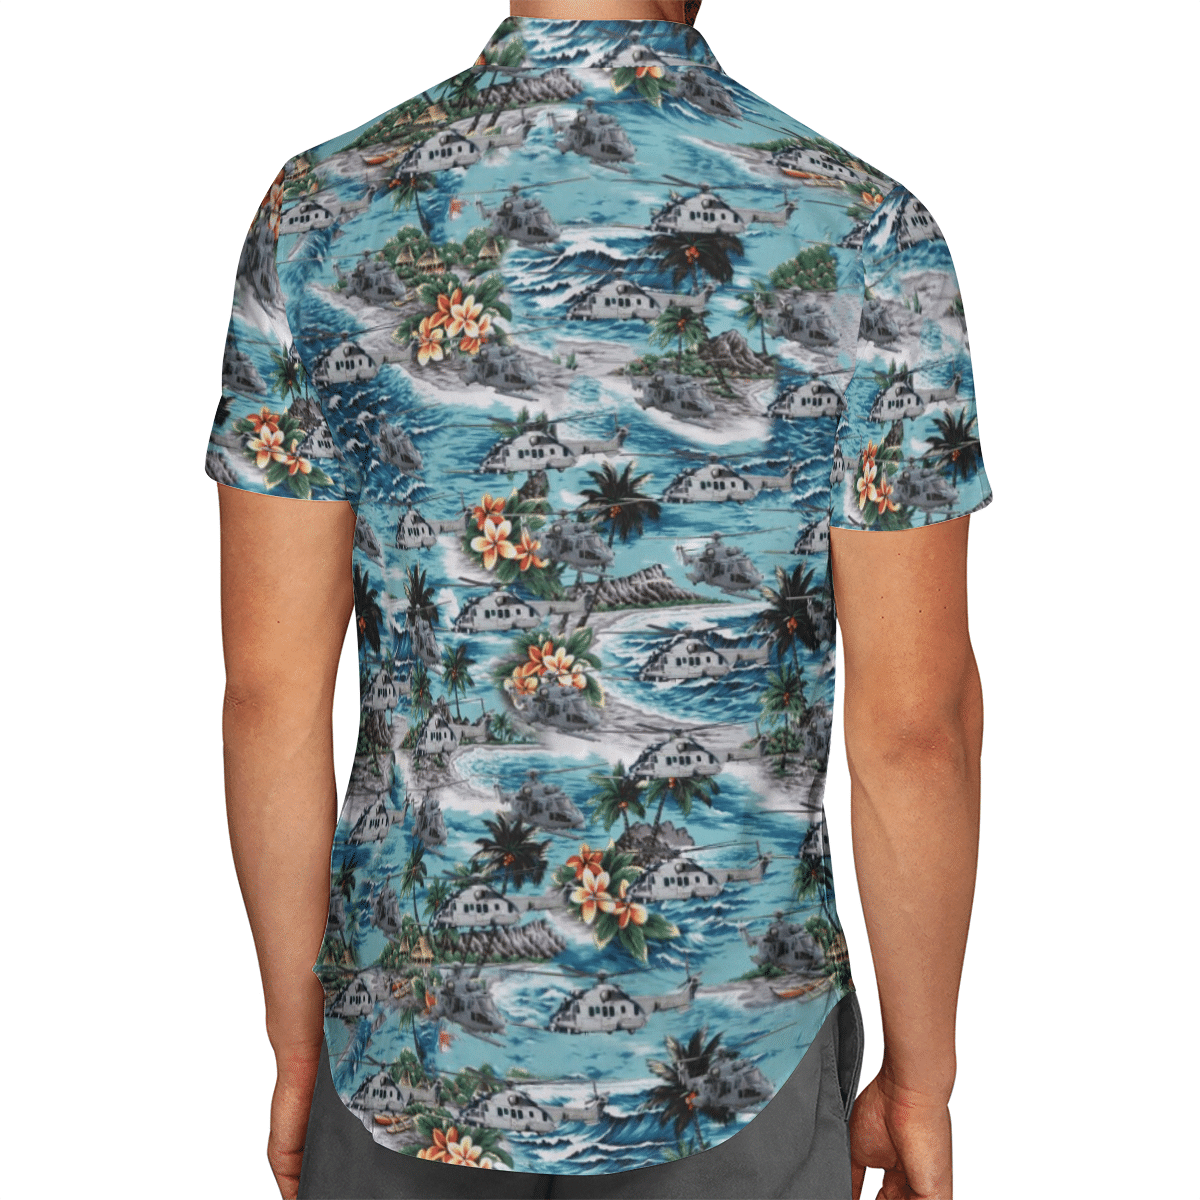 Going to the beach with a quality shirt 226